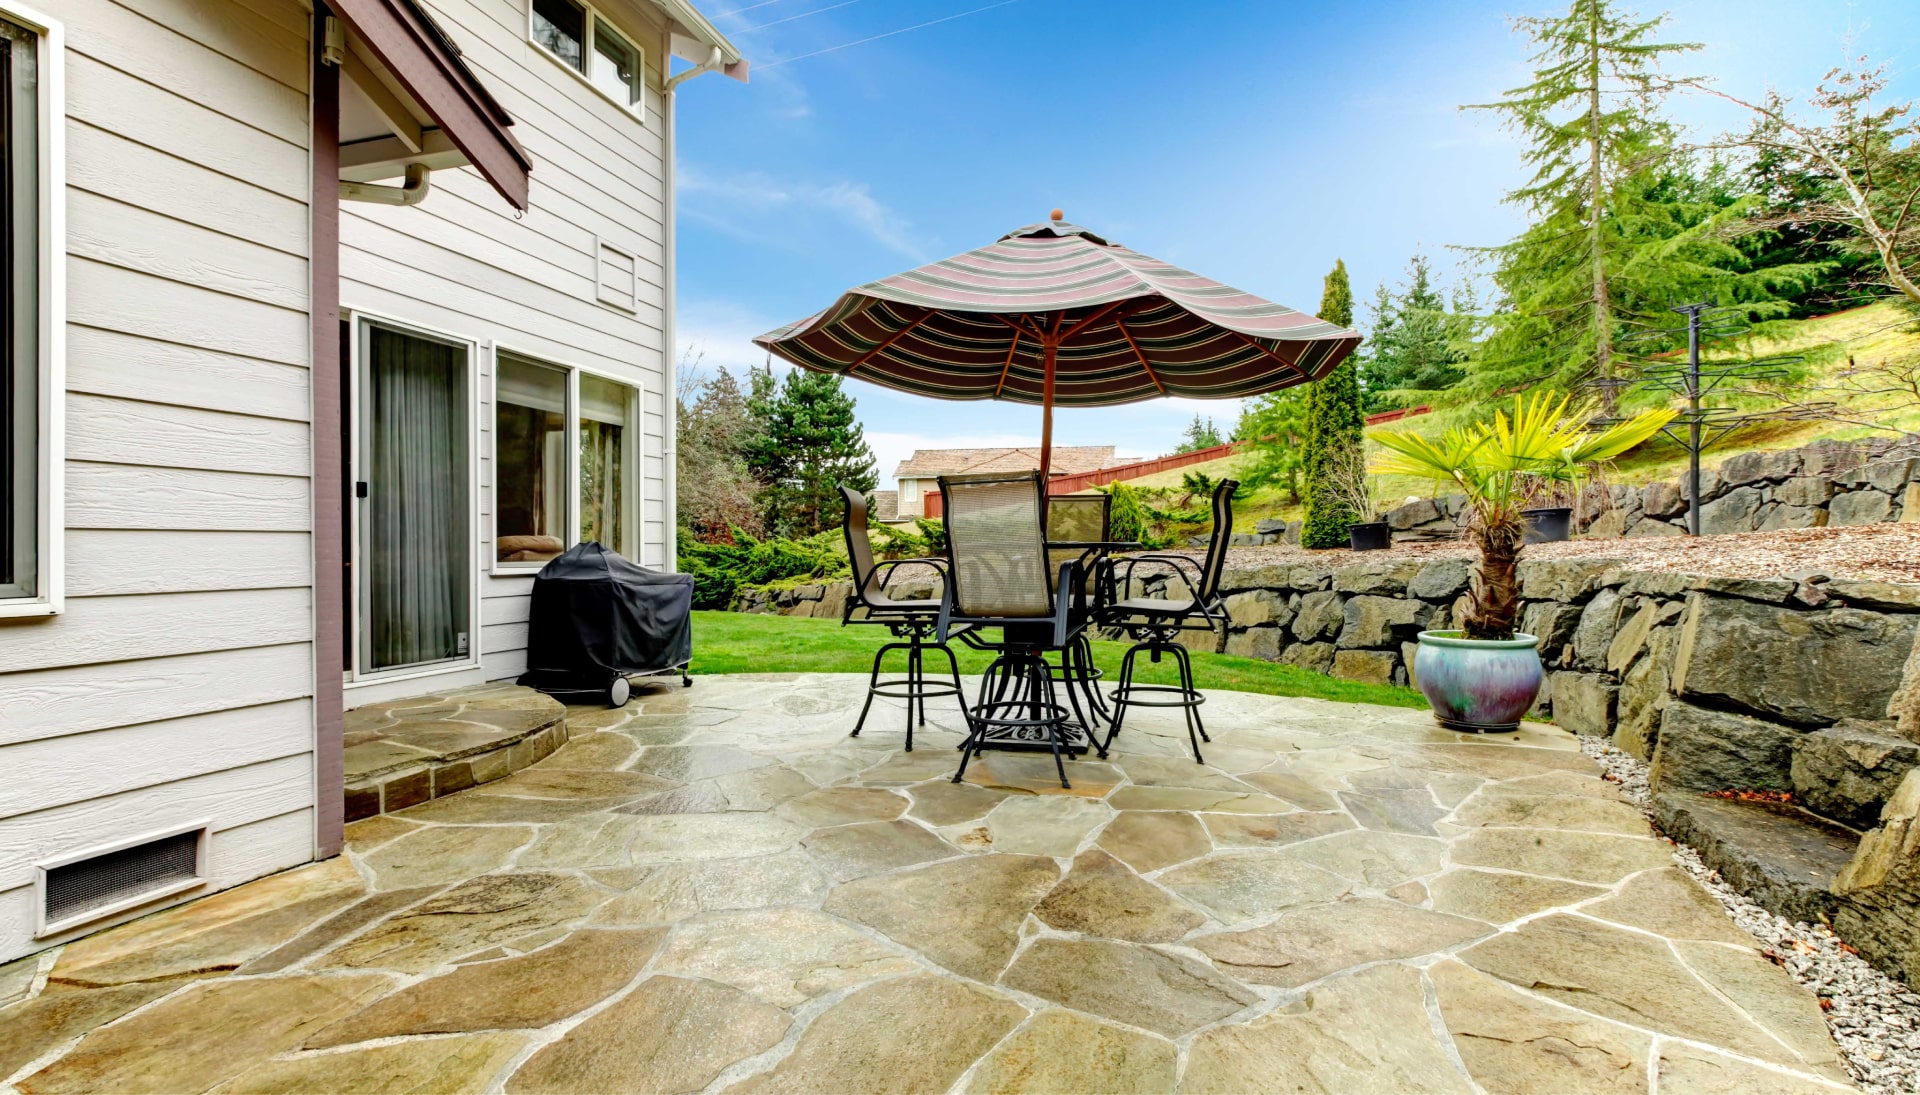 Create an Outdoor Oasis with Stunning Concrete Patio in Amarillo, TX - Enjoy Beautifully Textured and Patterned Concrete Surfaces for Your Entertaining and Relaxation Needs.